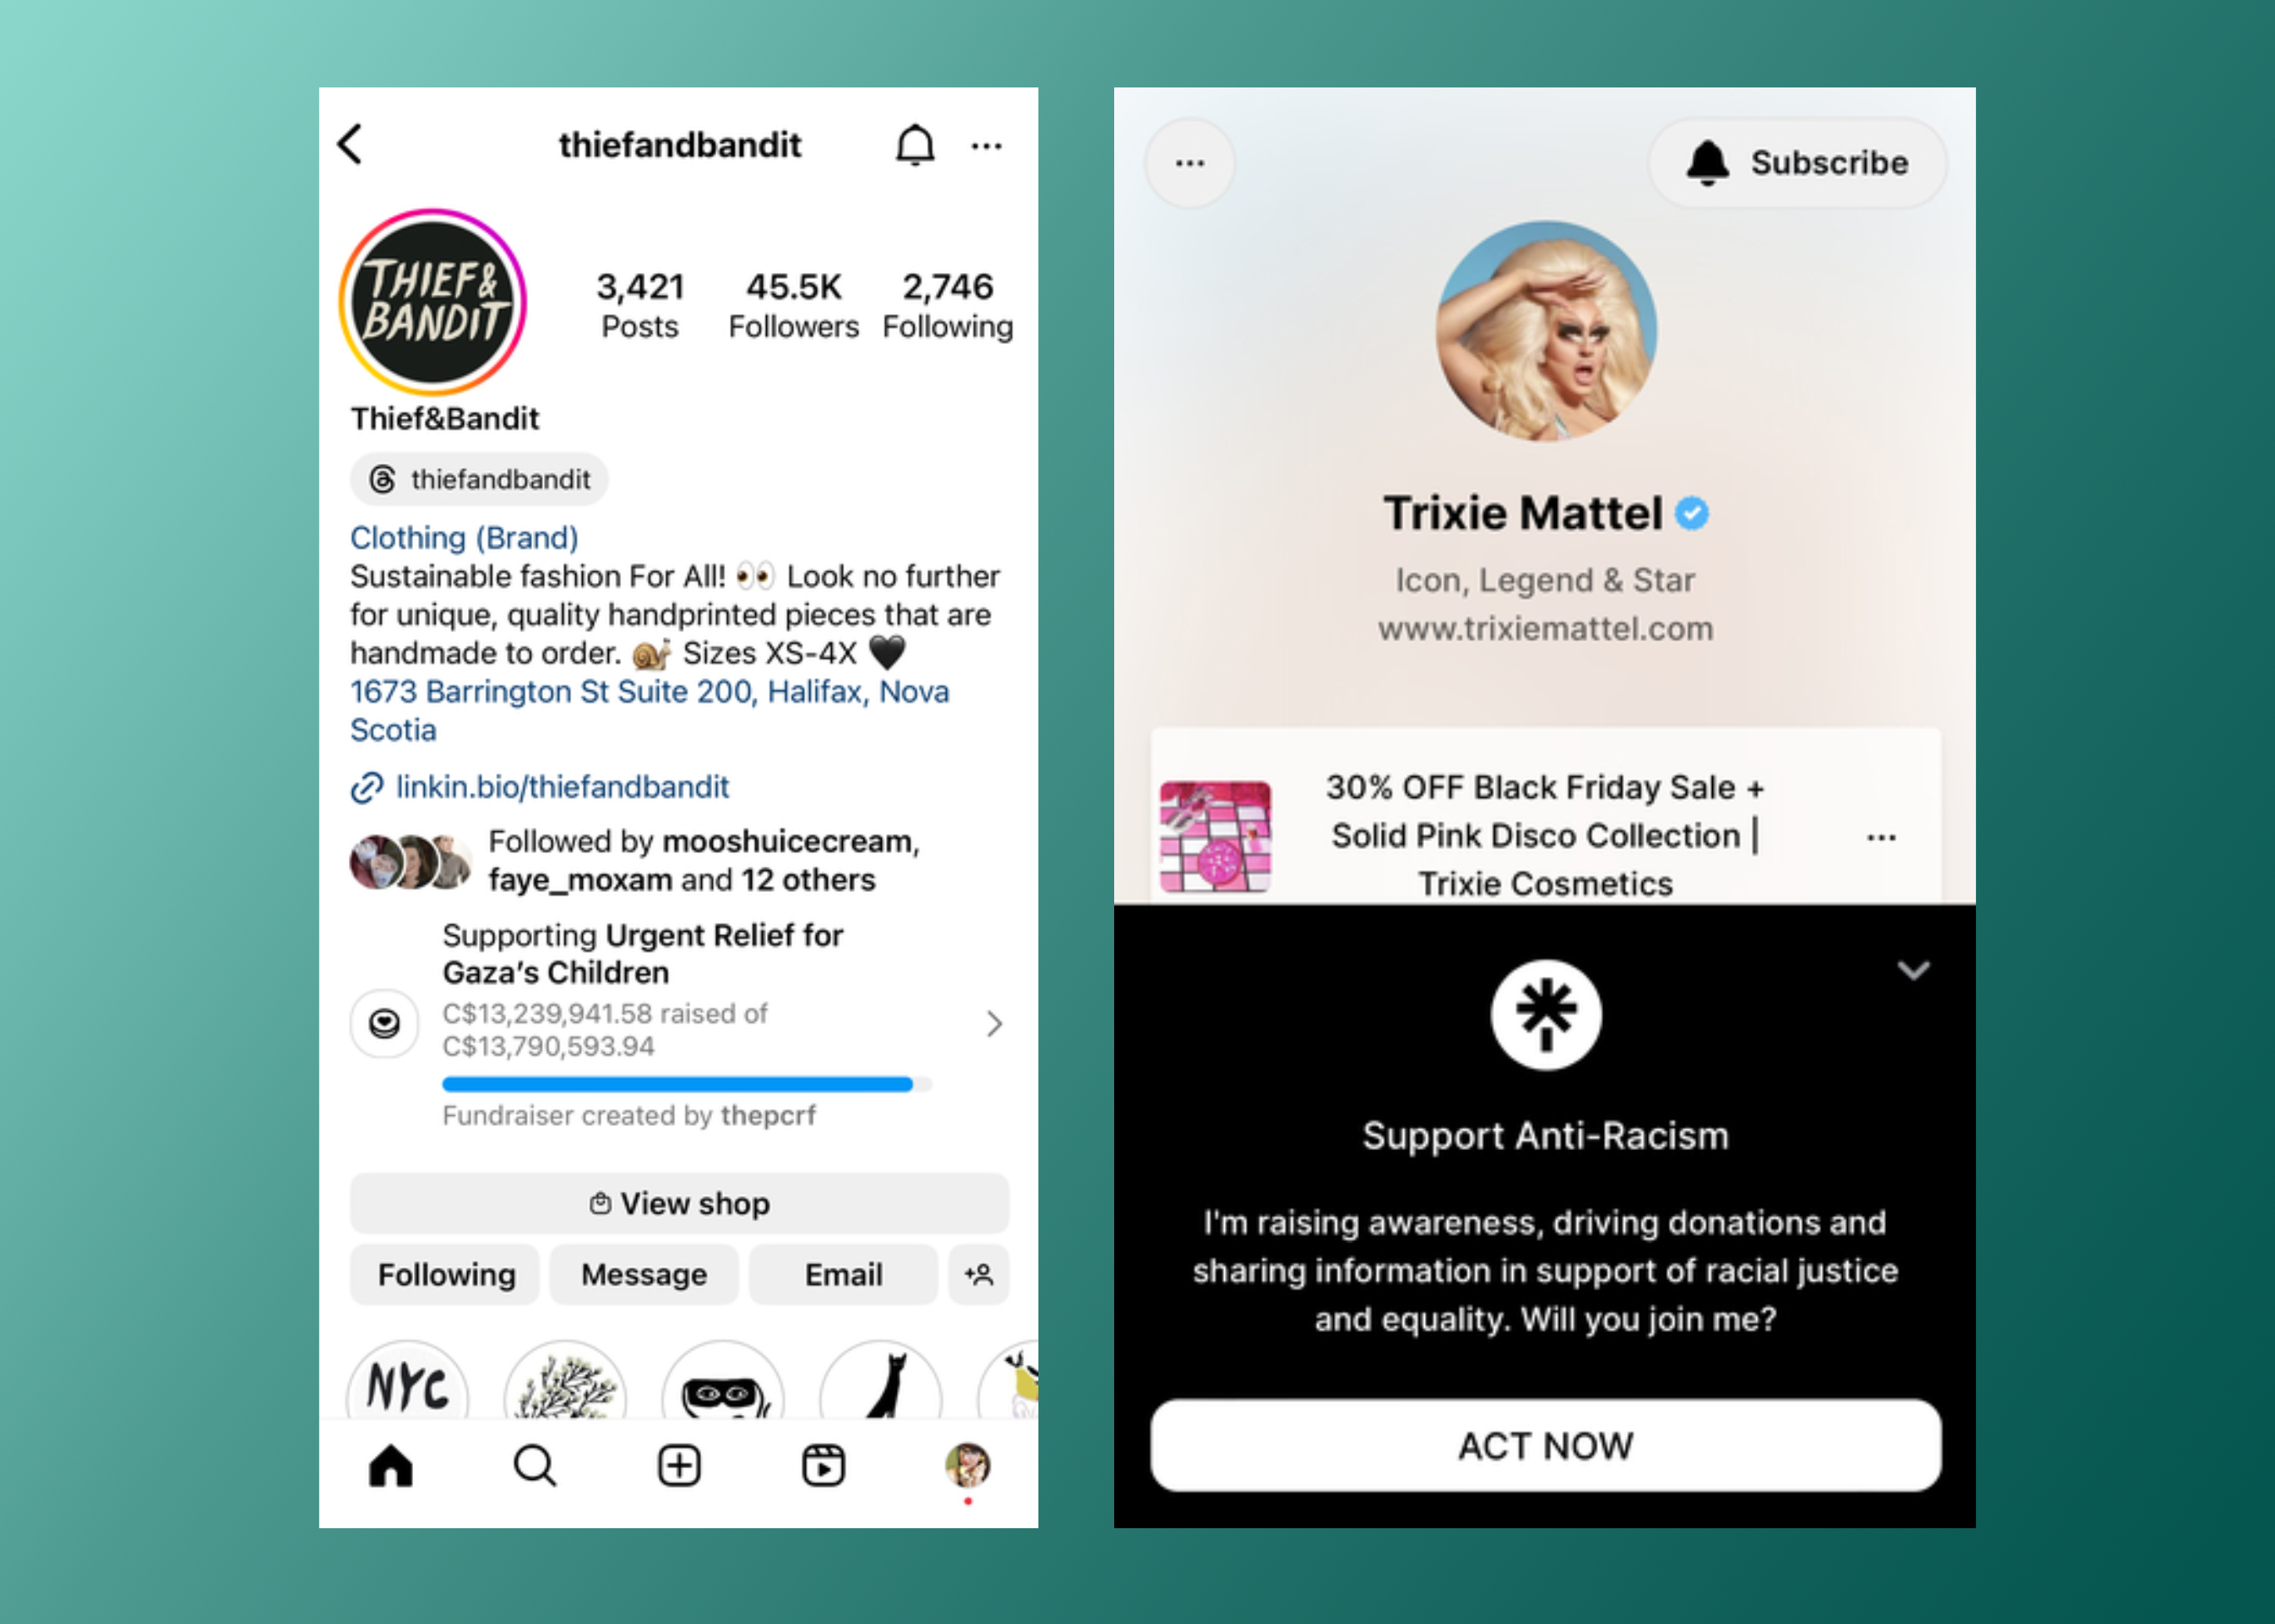 Mobile view of two Instagram profiles by Thief & Bandit and Trixie Mattel